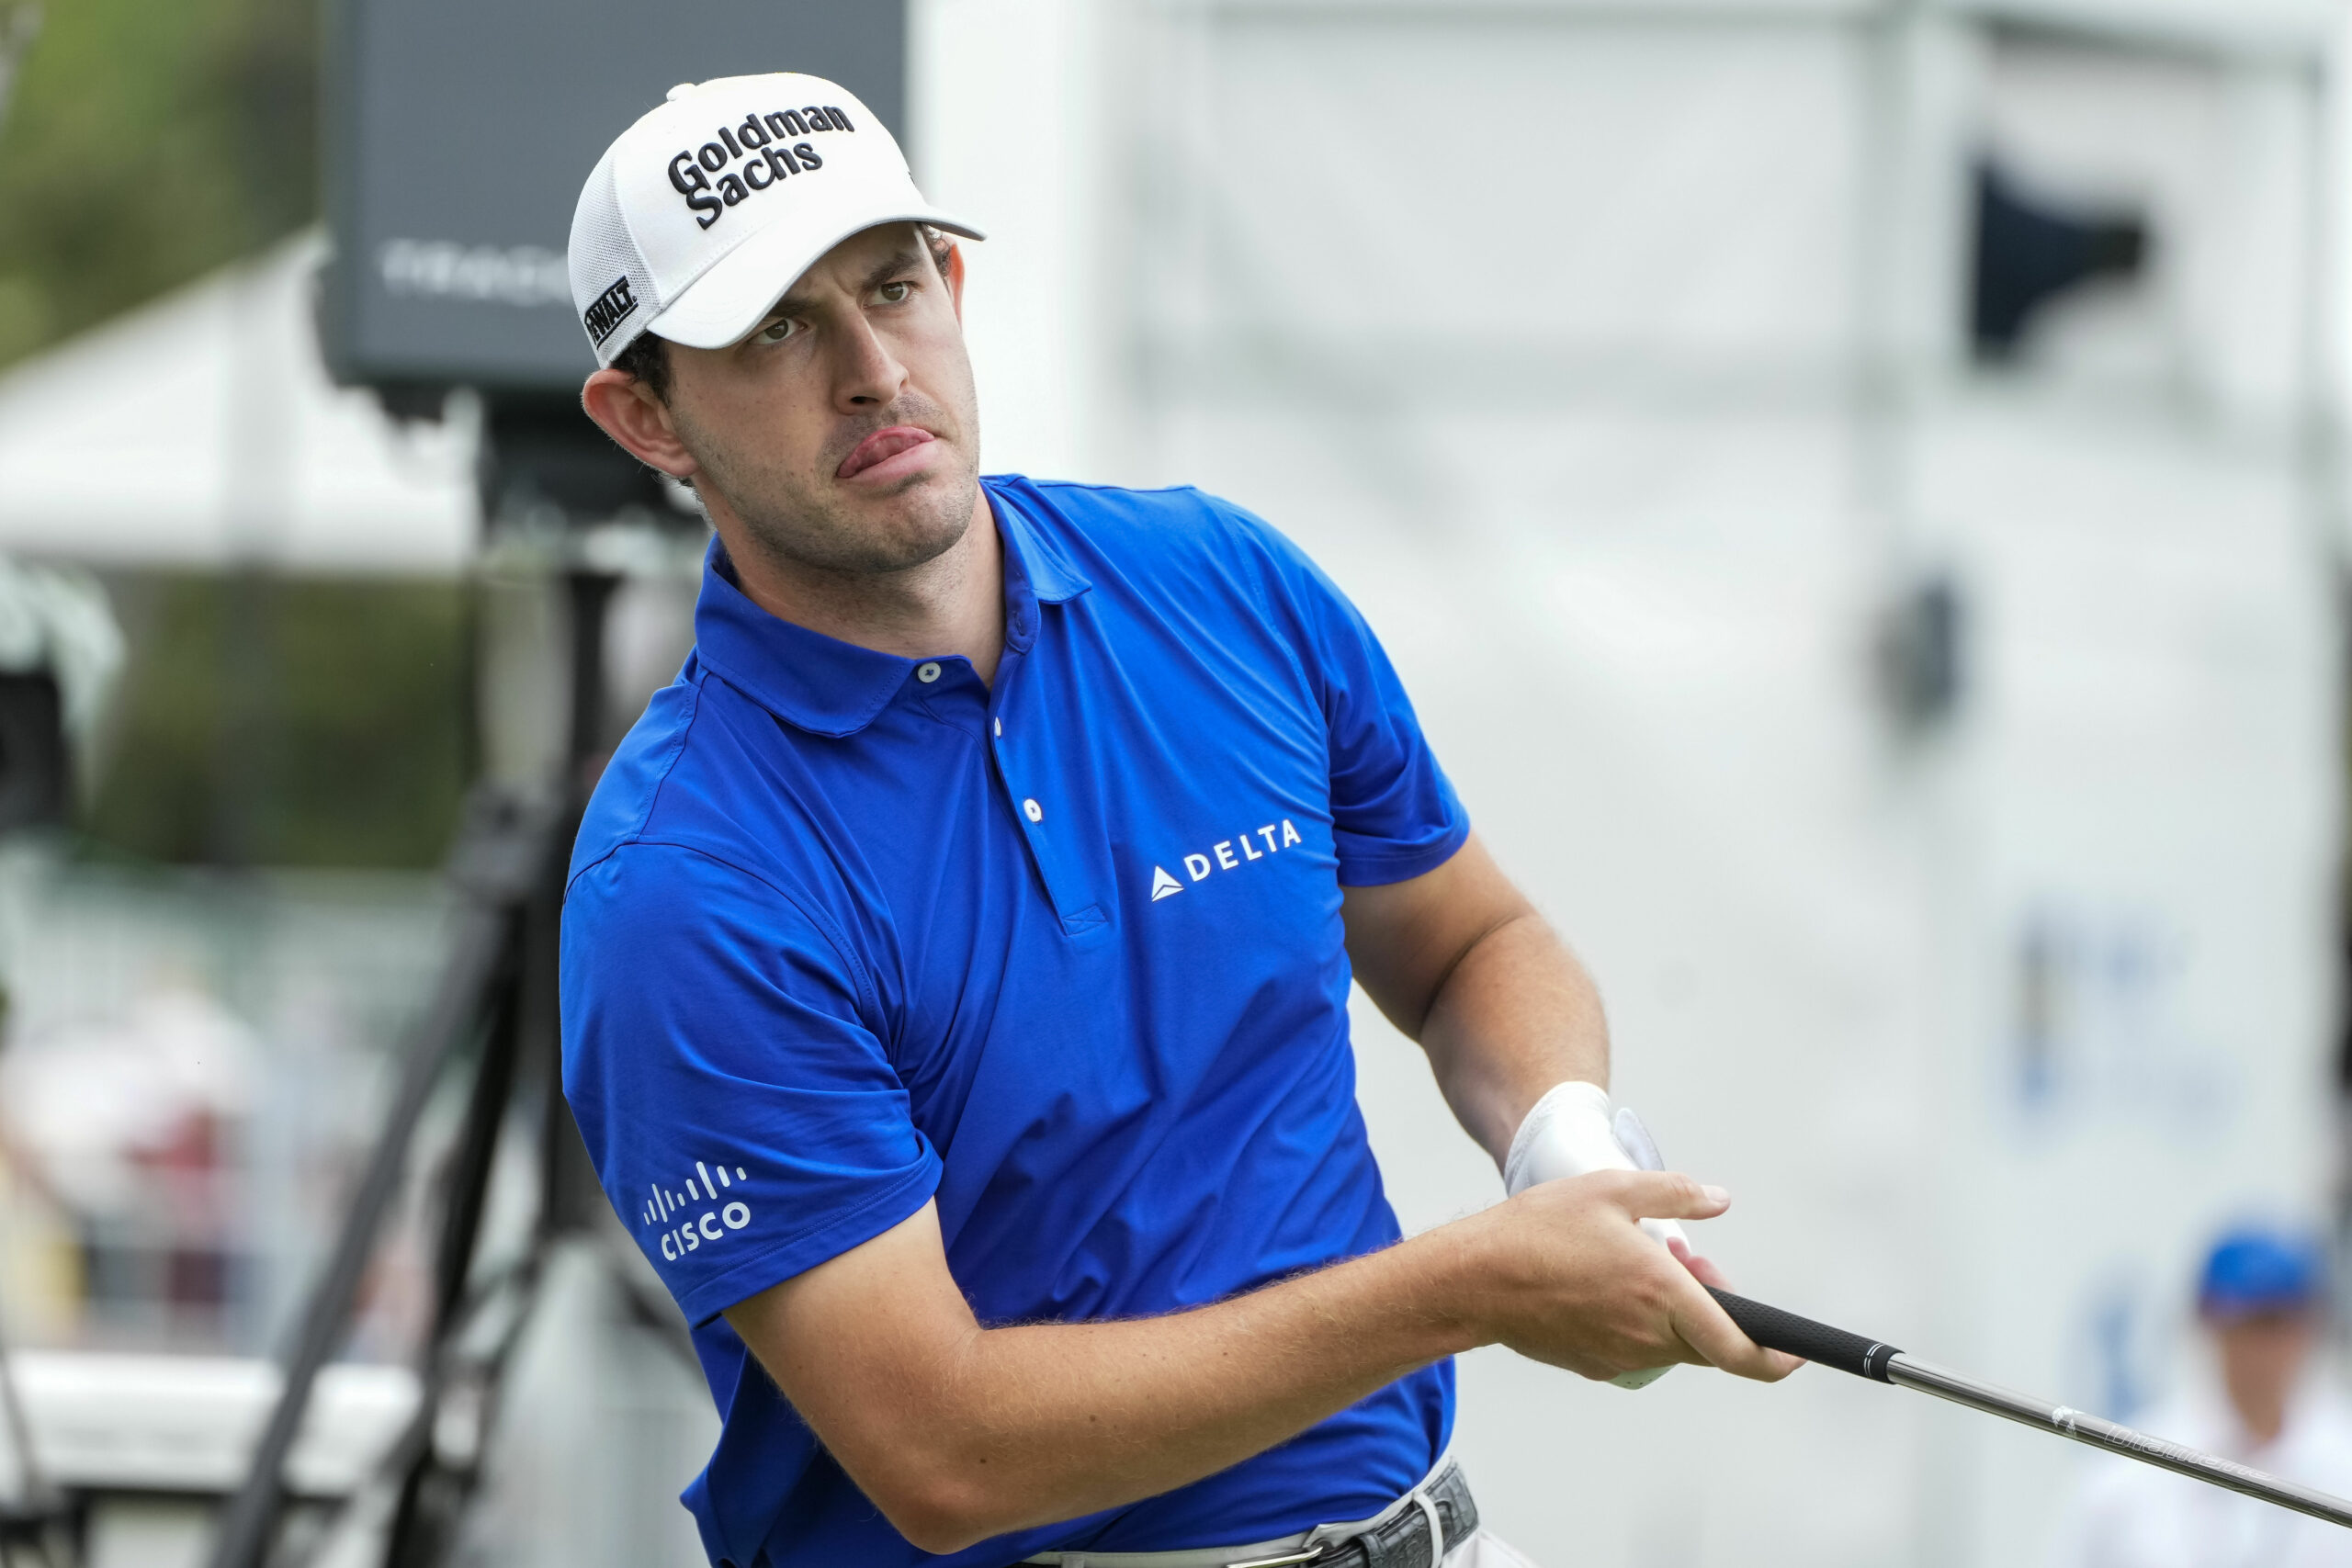 Patrick Cantlay made an ace at the RBC Heritage, and all Golf Twitter talked about was slow play